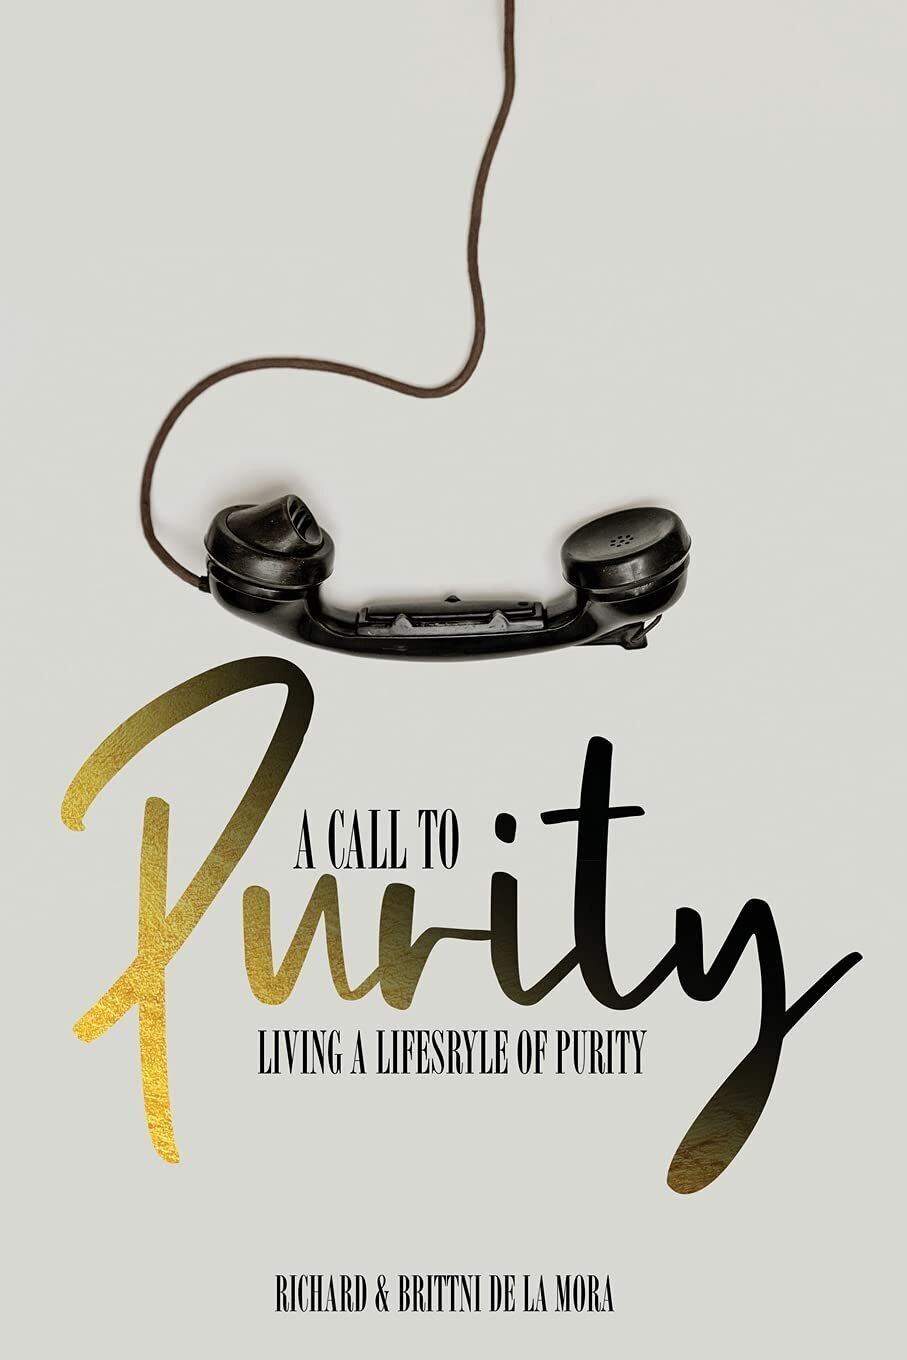 A Call to Purity: Living a Lifestyle of Purity